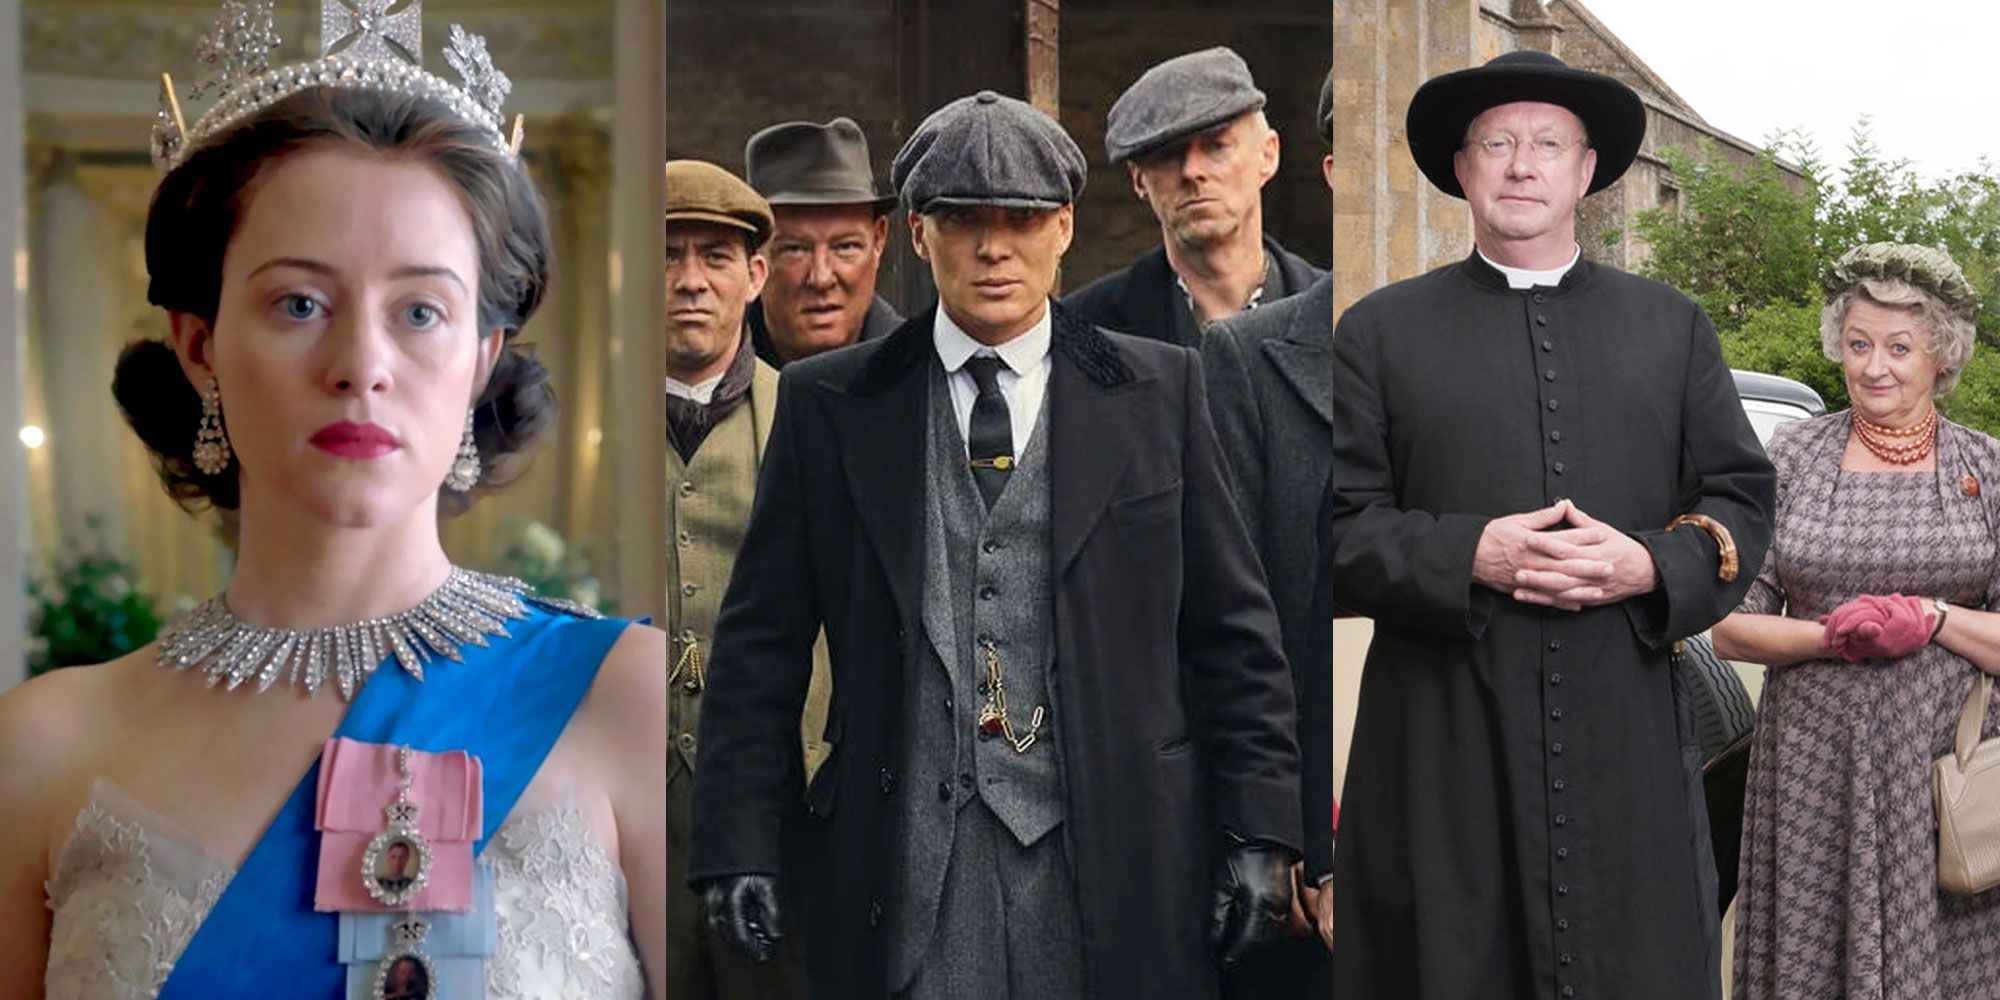 A split image features the main characters in The Crown, Peaky Blinders, and Father Brown